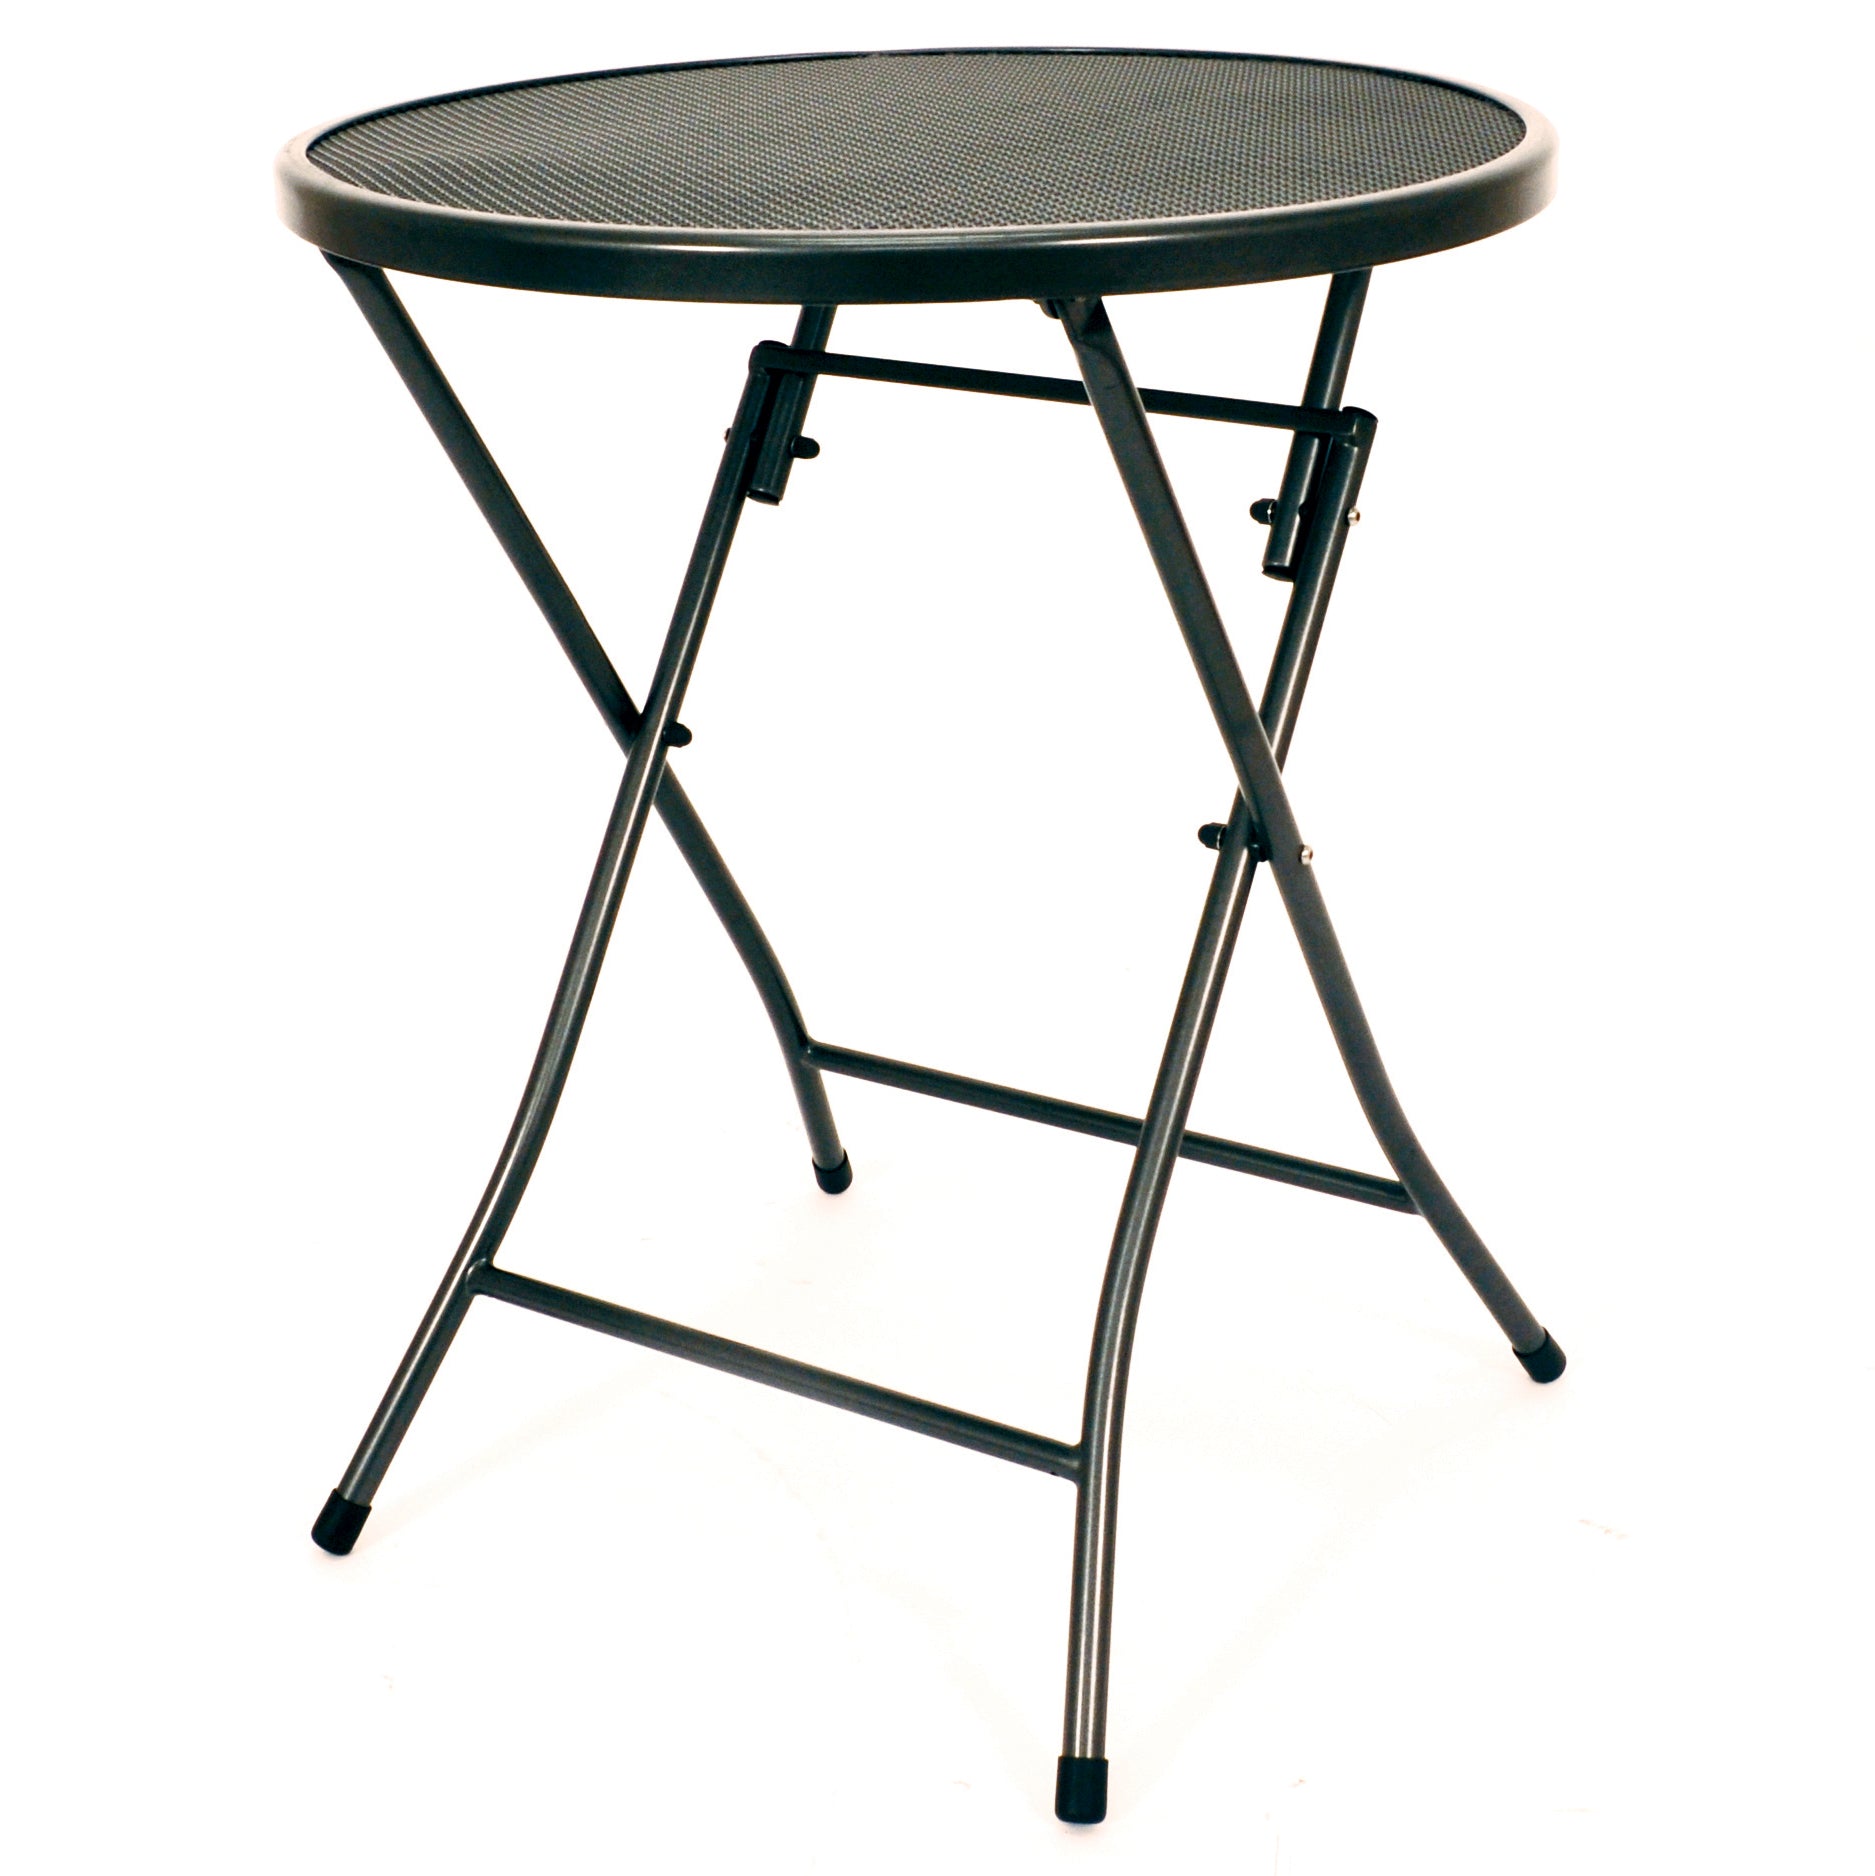 High quality foldable wrought iron bistro table 